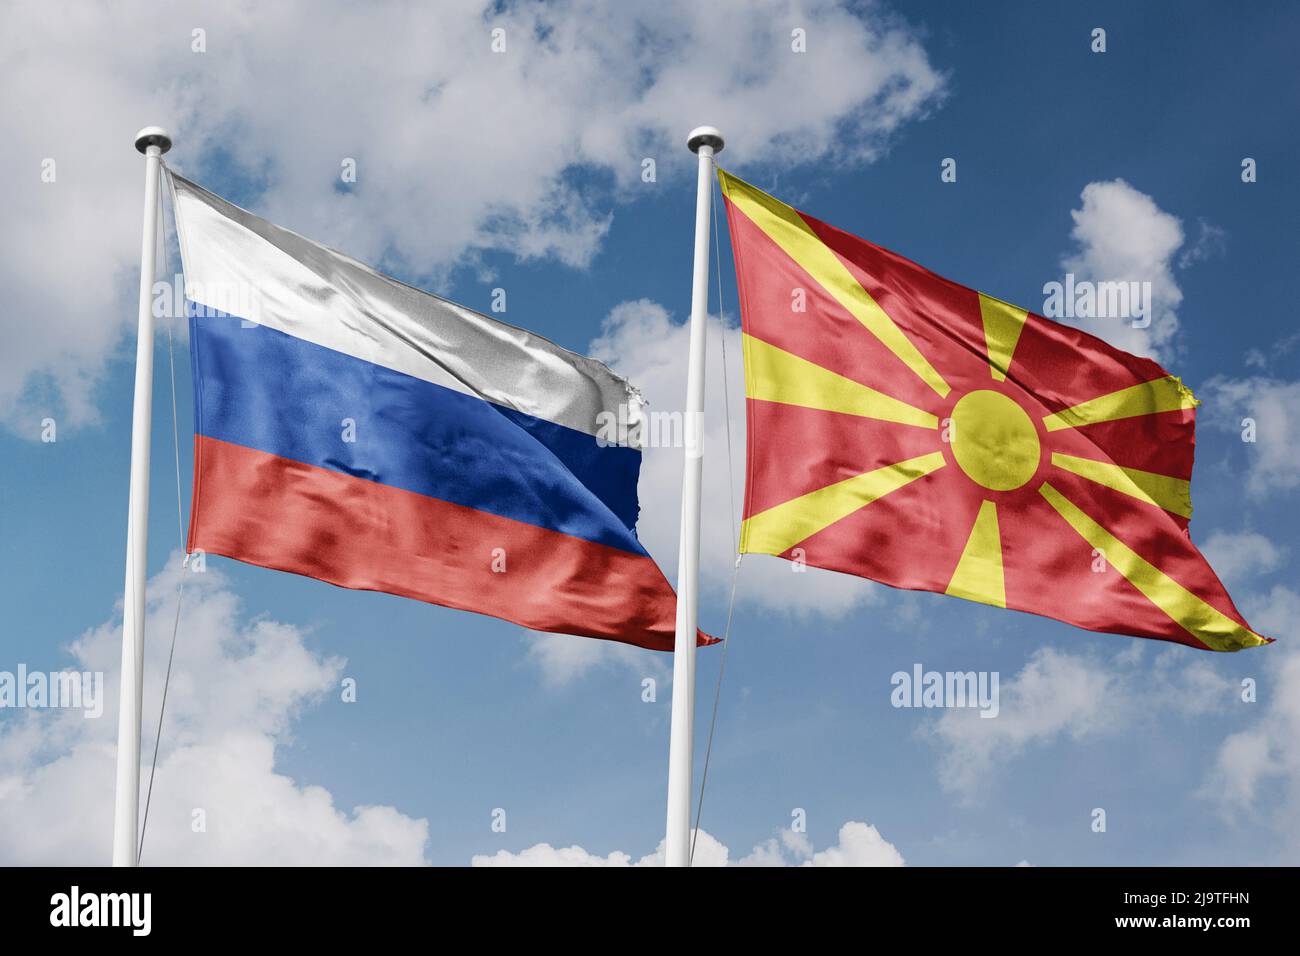 Russia and North Macedonia two flags on flagpoles and blue cloudy sky background Stock Photo